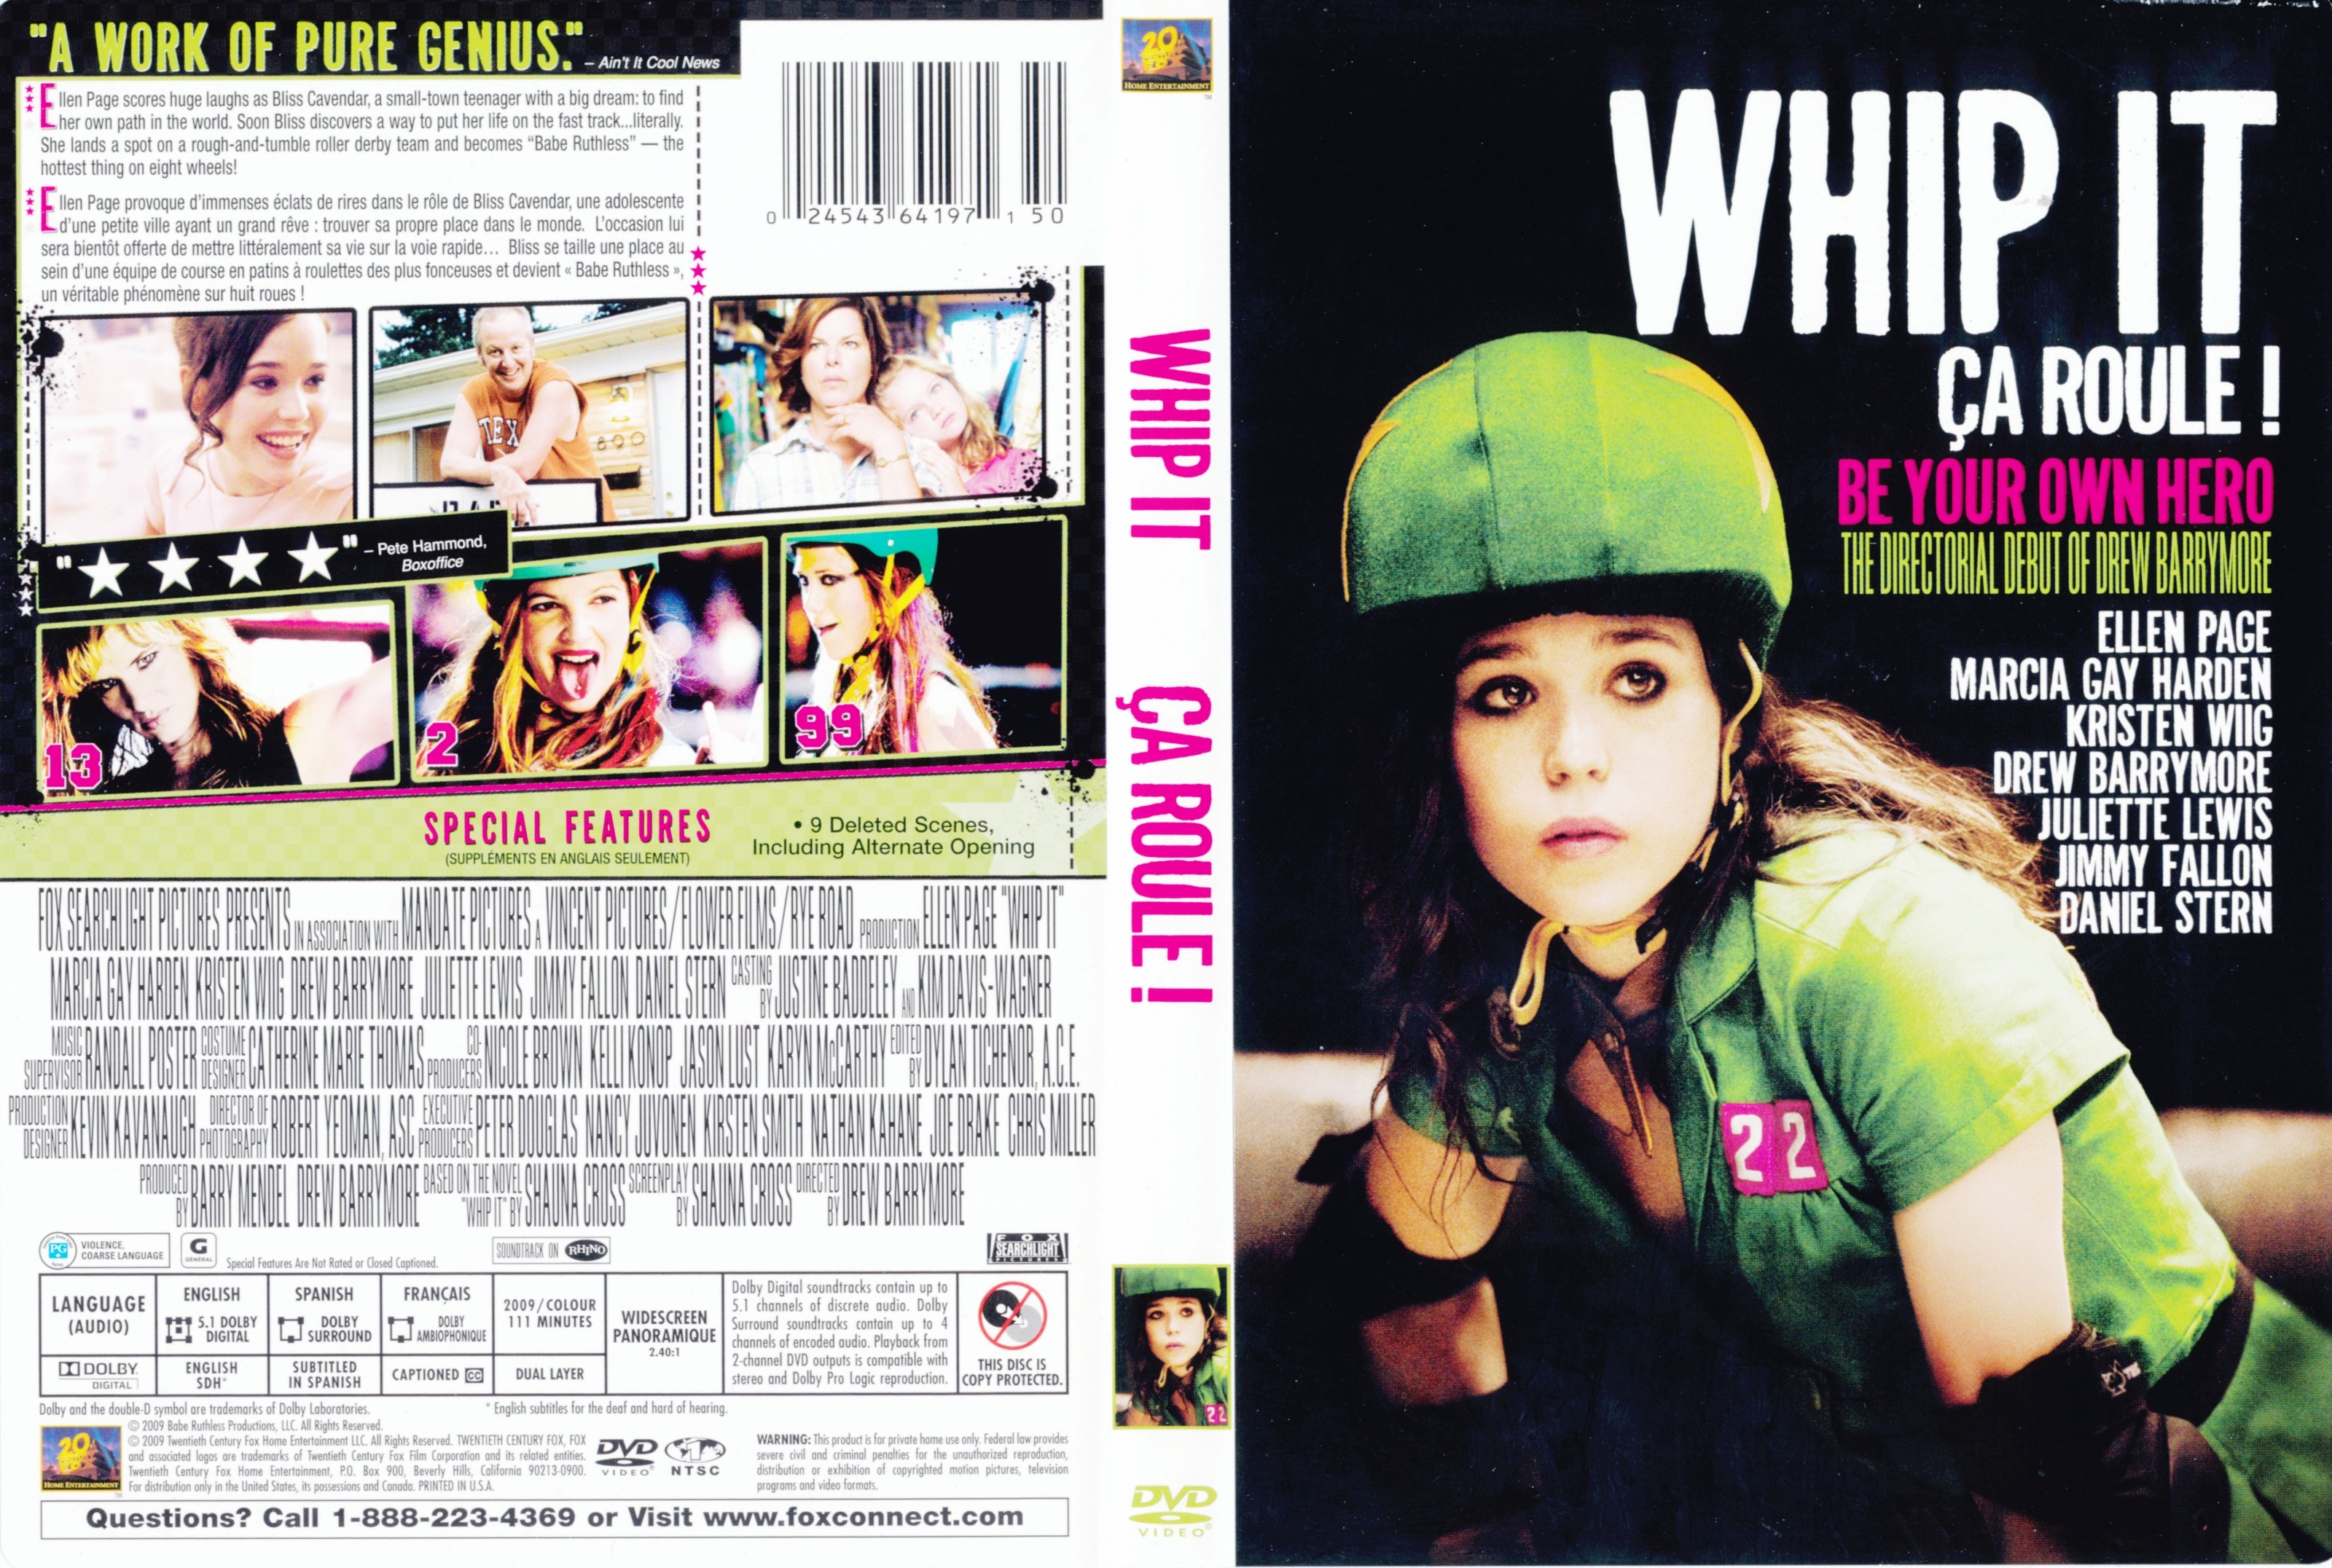 Jaquette DVD Whip it - Ca roule (Canadienne)